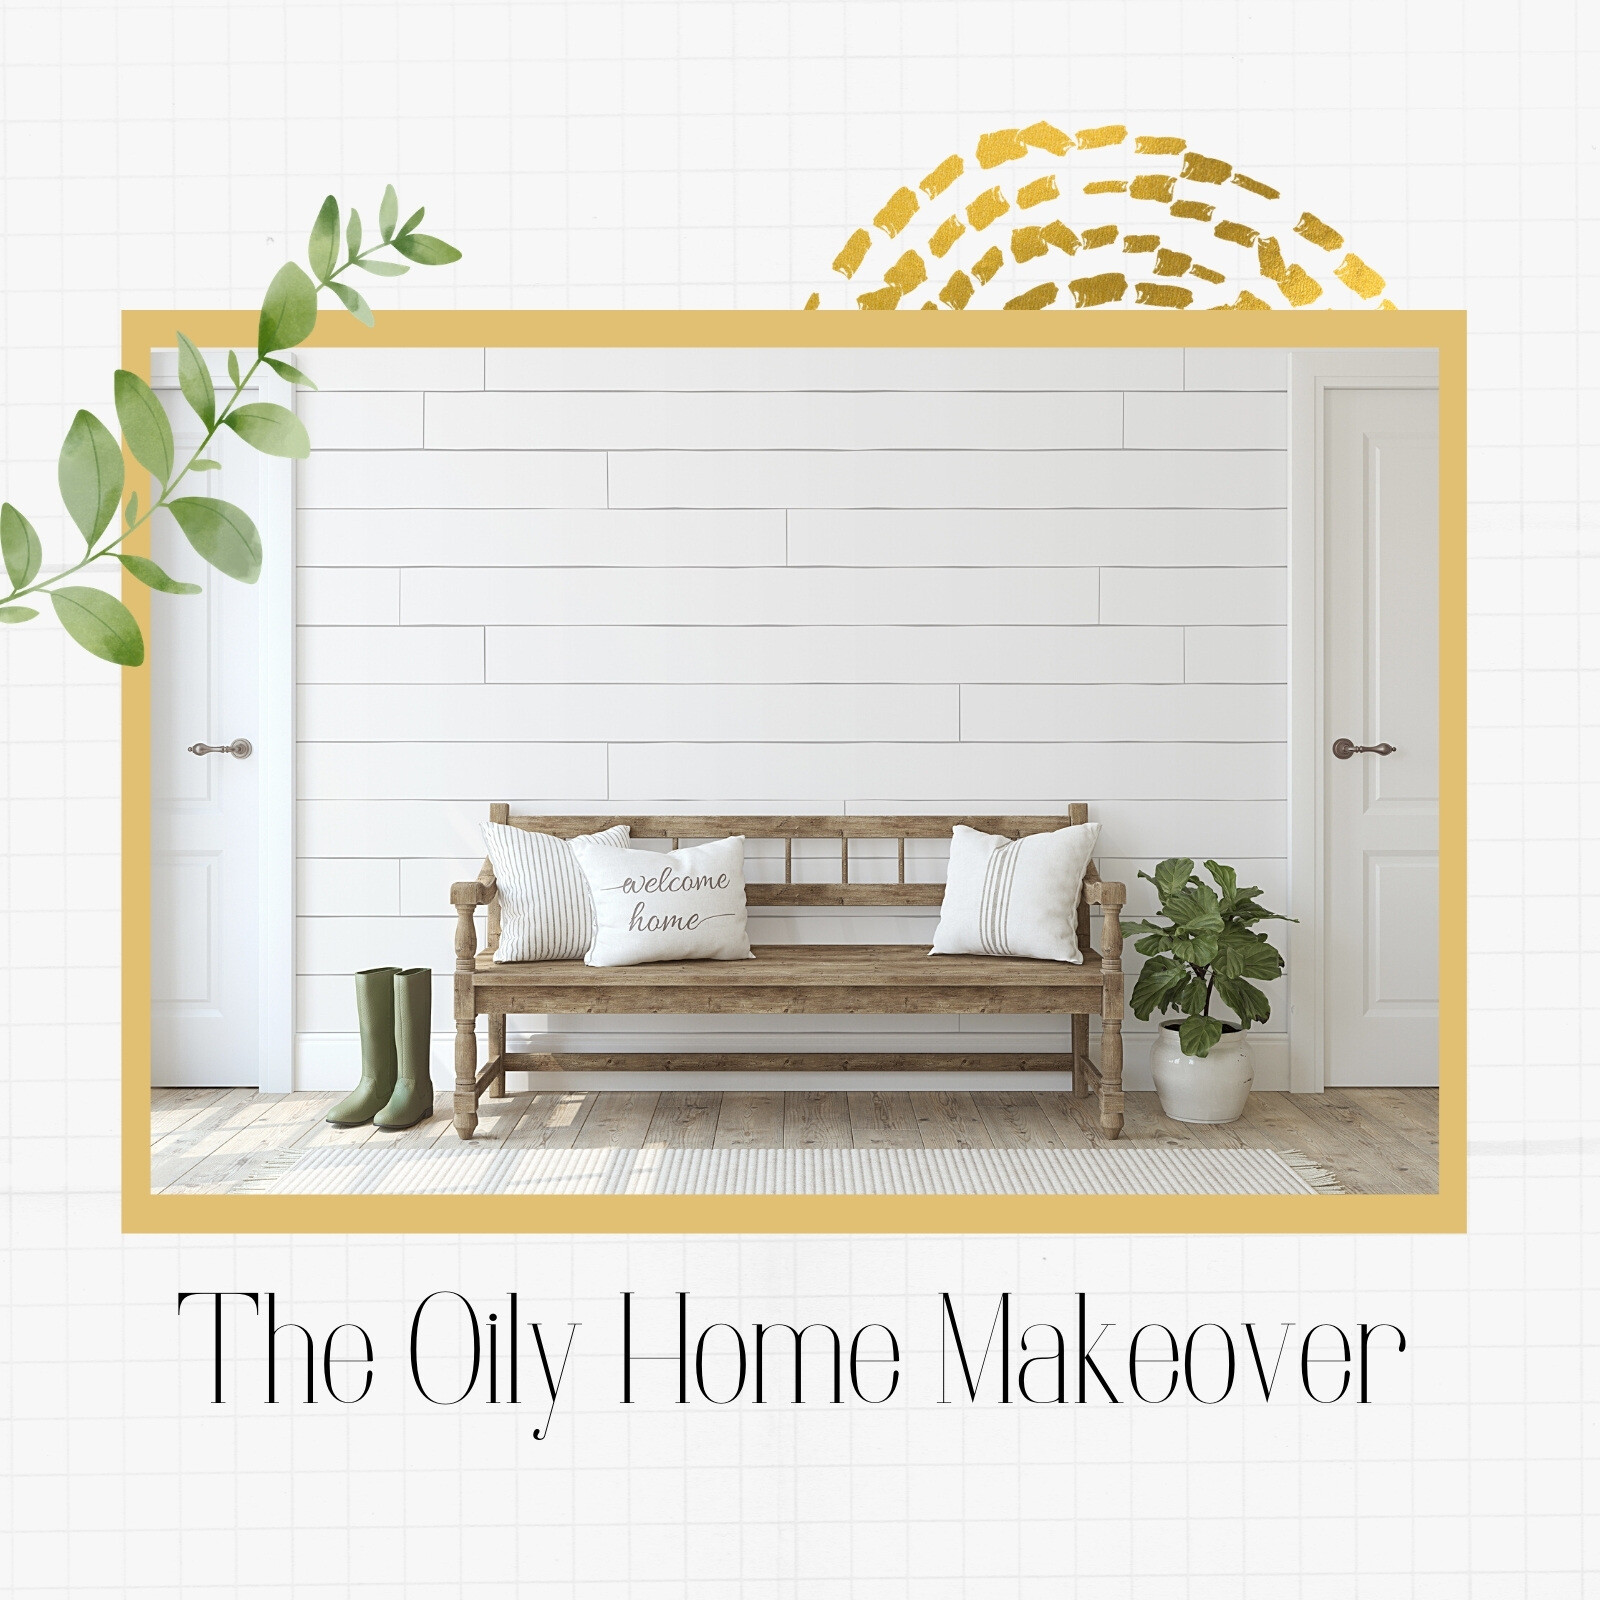 The Oily Home Makeover